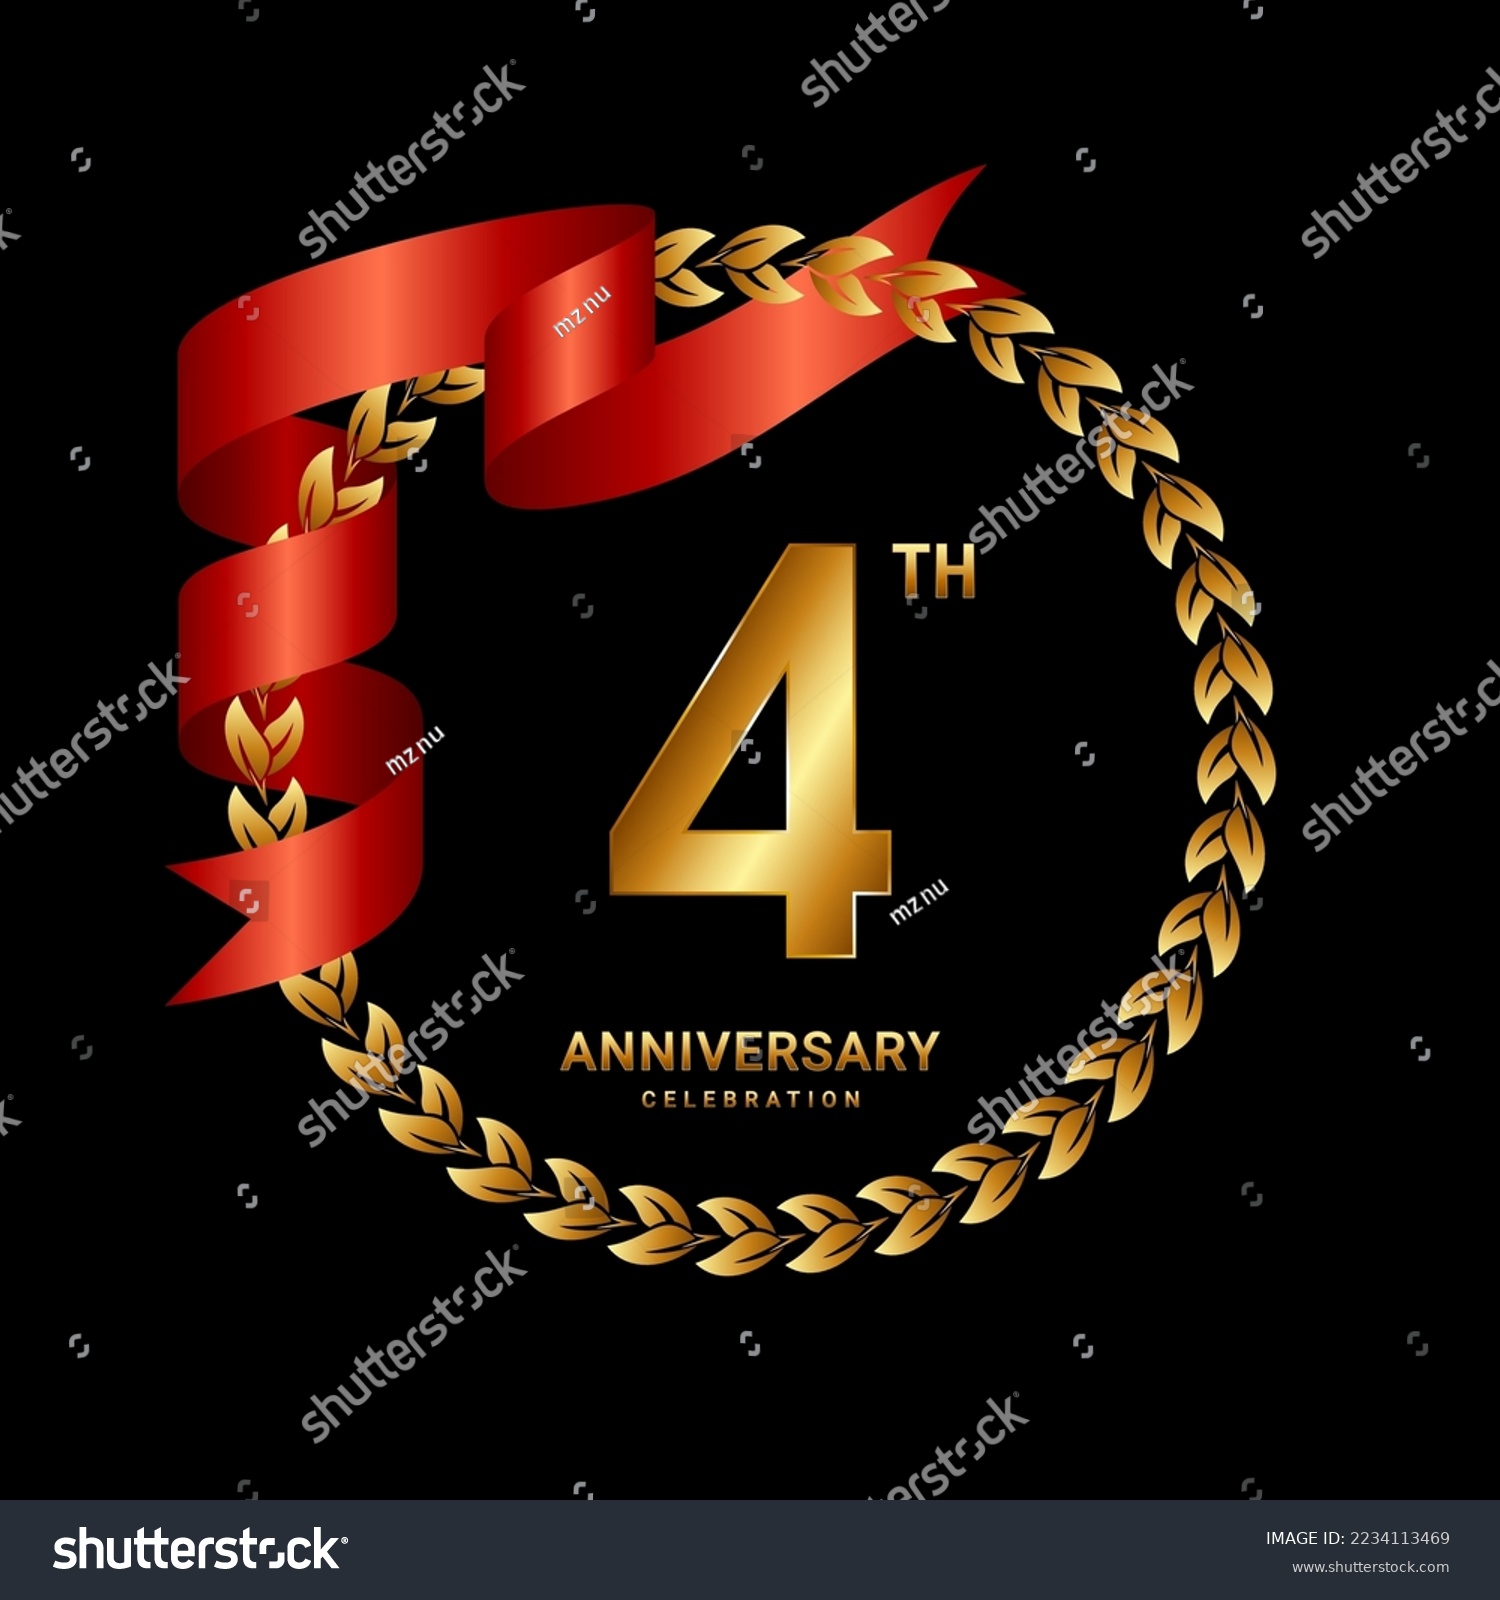 SVG of 4th Anniversary Celebration. Anniversary Logo Design with Laurel Wreath and Red Ribbon for Celebration Event, Wedding, Invitation, Greeting Card. Logo Vector Illustration svg